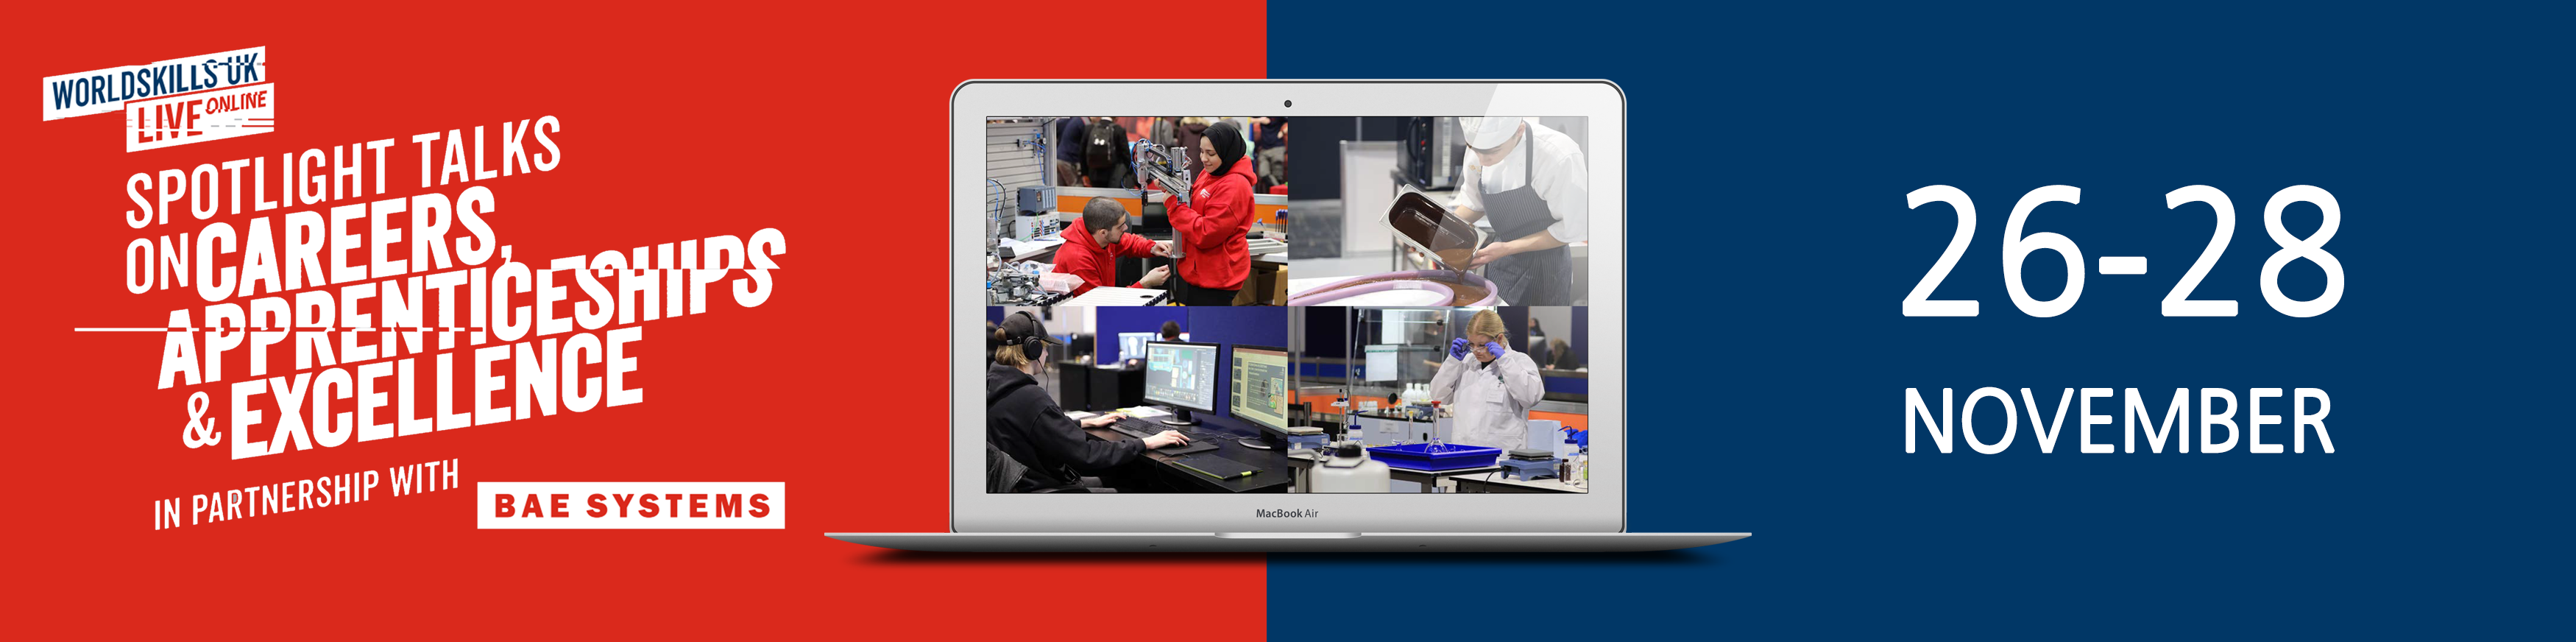 WorldSkills UK LIVE online: Spotlight Talks on Careers, Apprenticeships and Excellence in partnership with BAE Systems